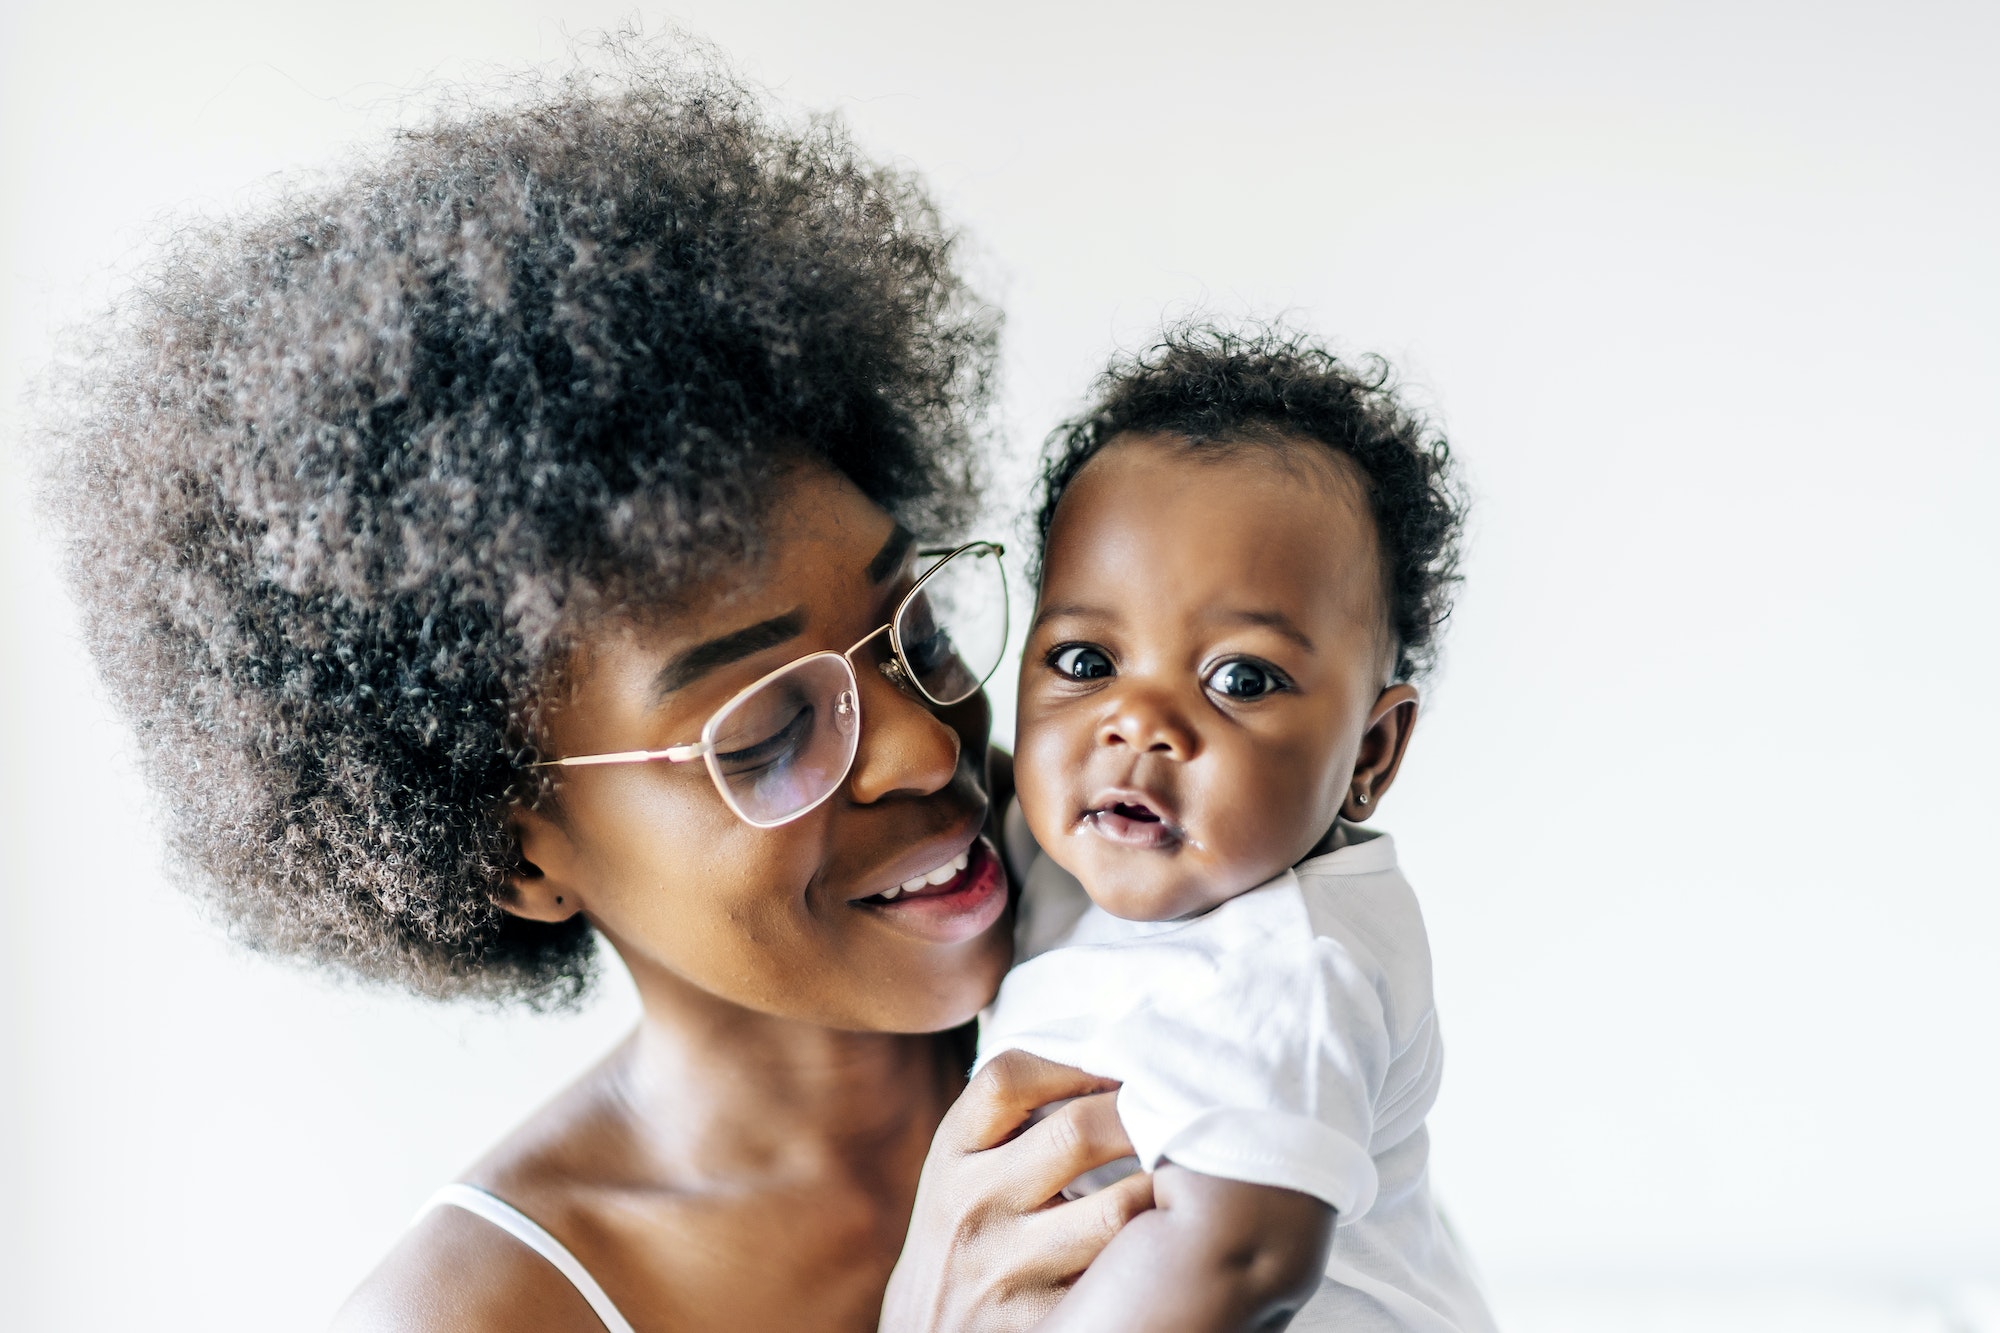 African-American mother taking care and loving her baby against a white background